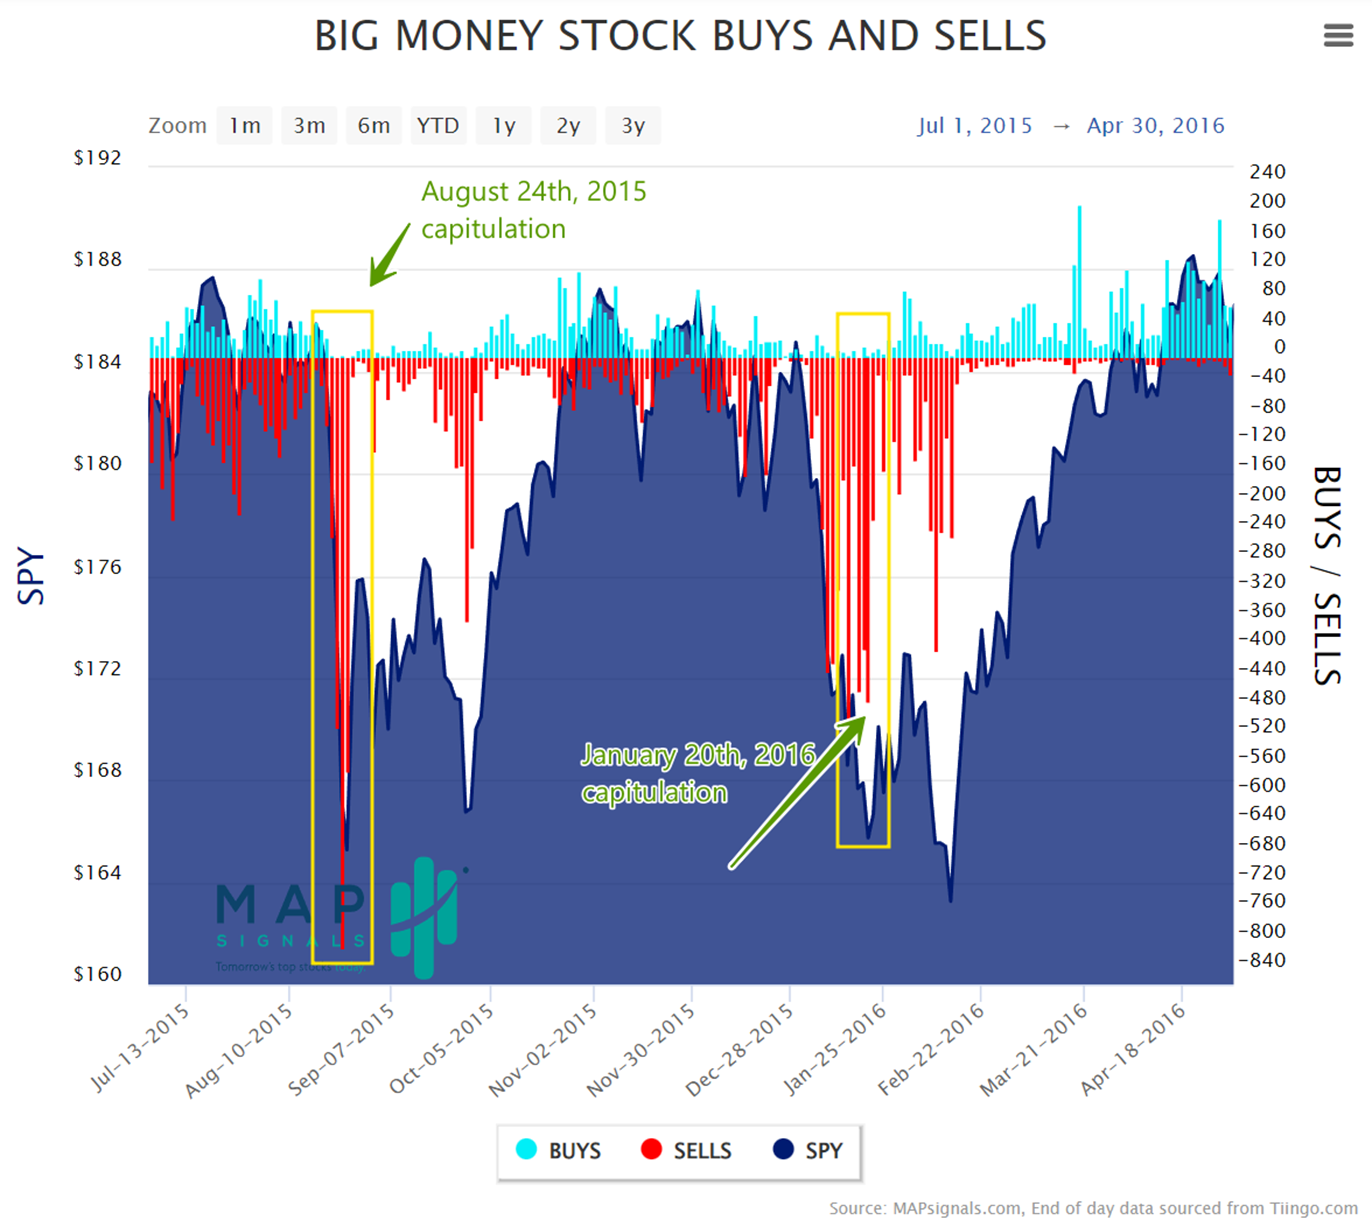 2015 & 2016 Capitulation | Big Money Stock Buys and Sells